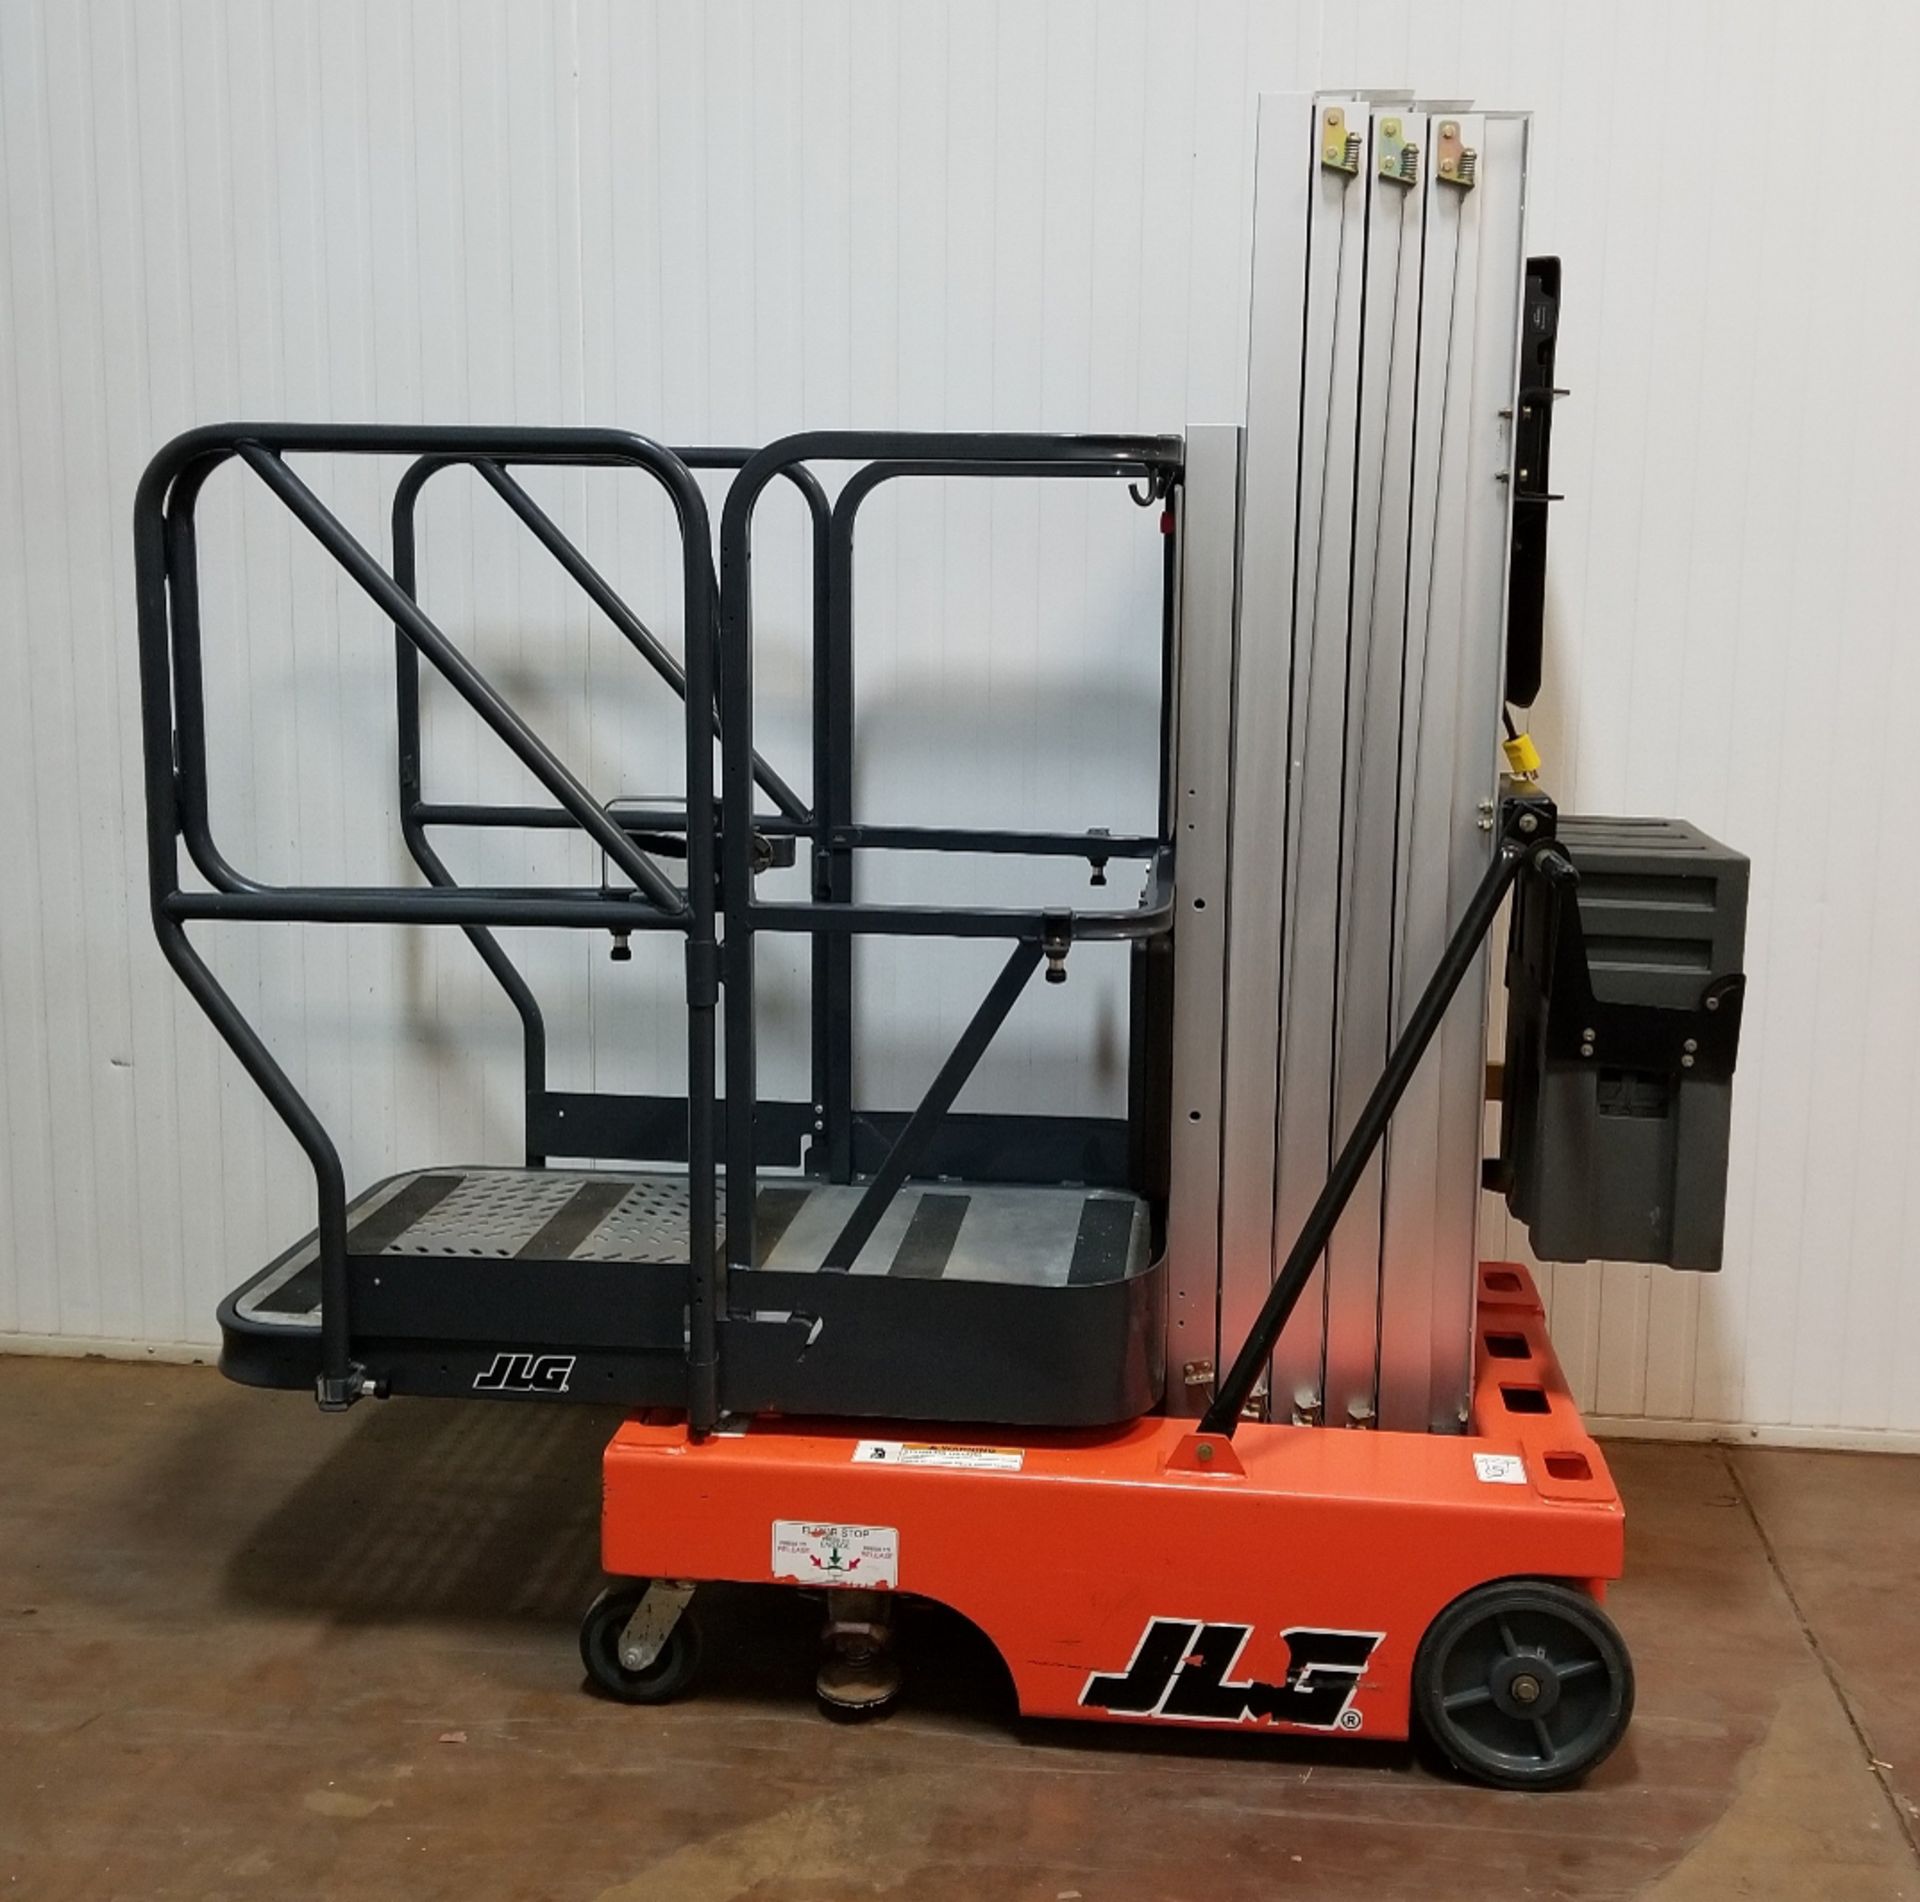 JLG (2009) 15SP 400 LB. CAPACITY 12V ELECTRIC ORDER PICKER WITH 180" MAX. LIFT HEIGHT, BUILT-IN - Image 2 of 4